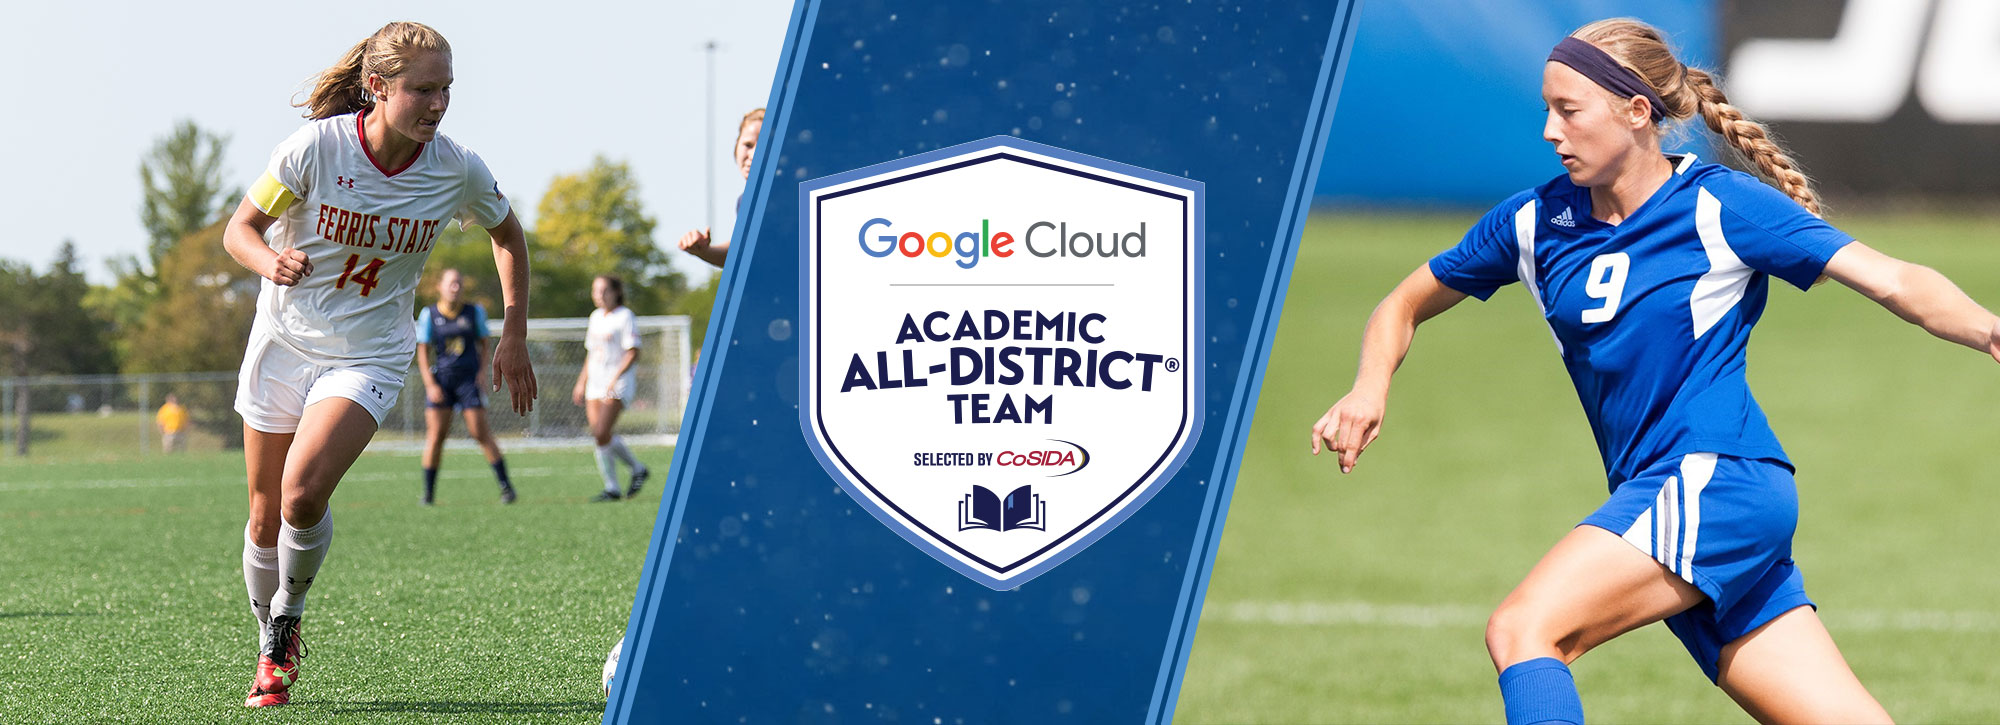 Ferris State's Dubbert, Grand Valley State's Ham Honored Google Cloud Academic All-District